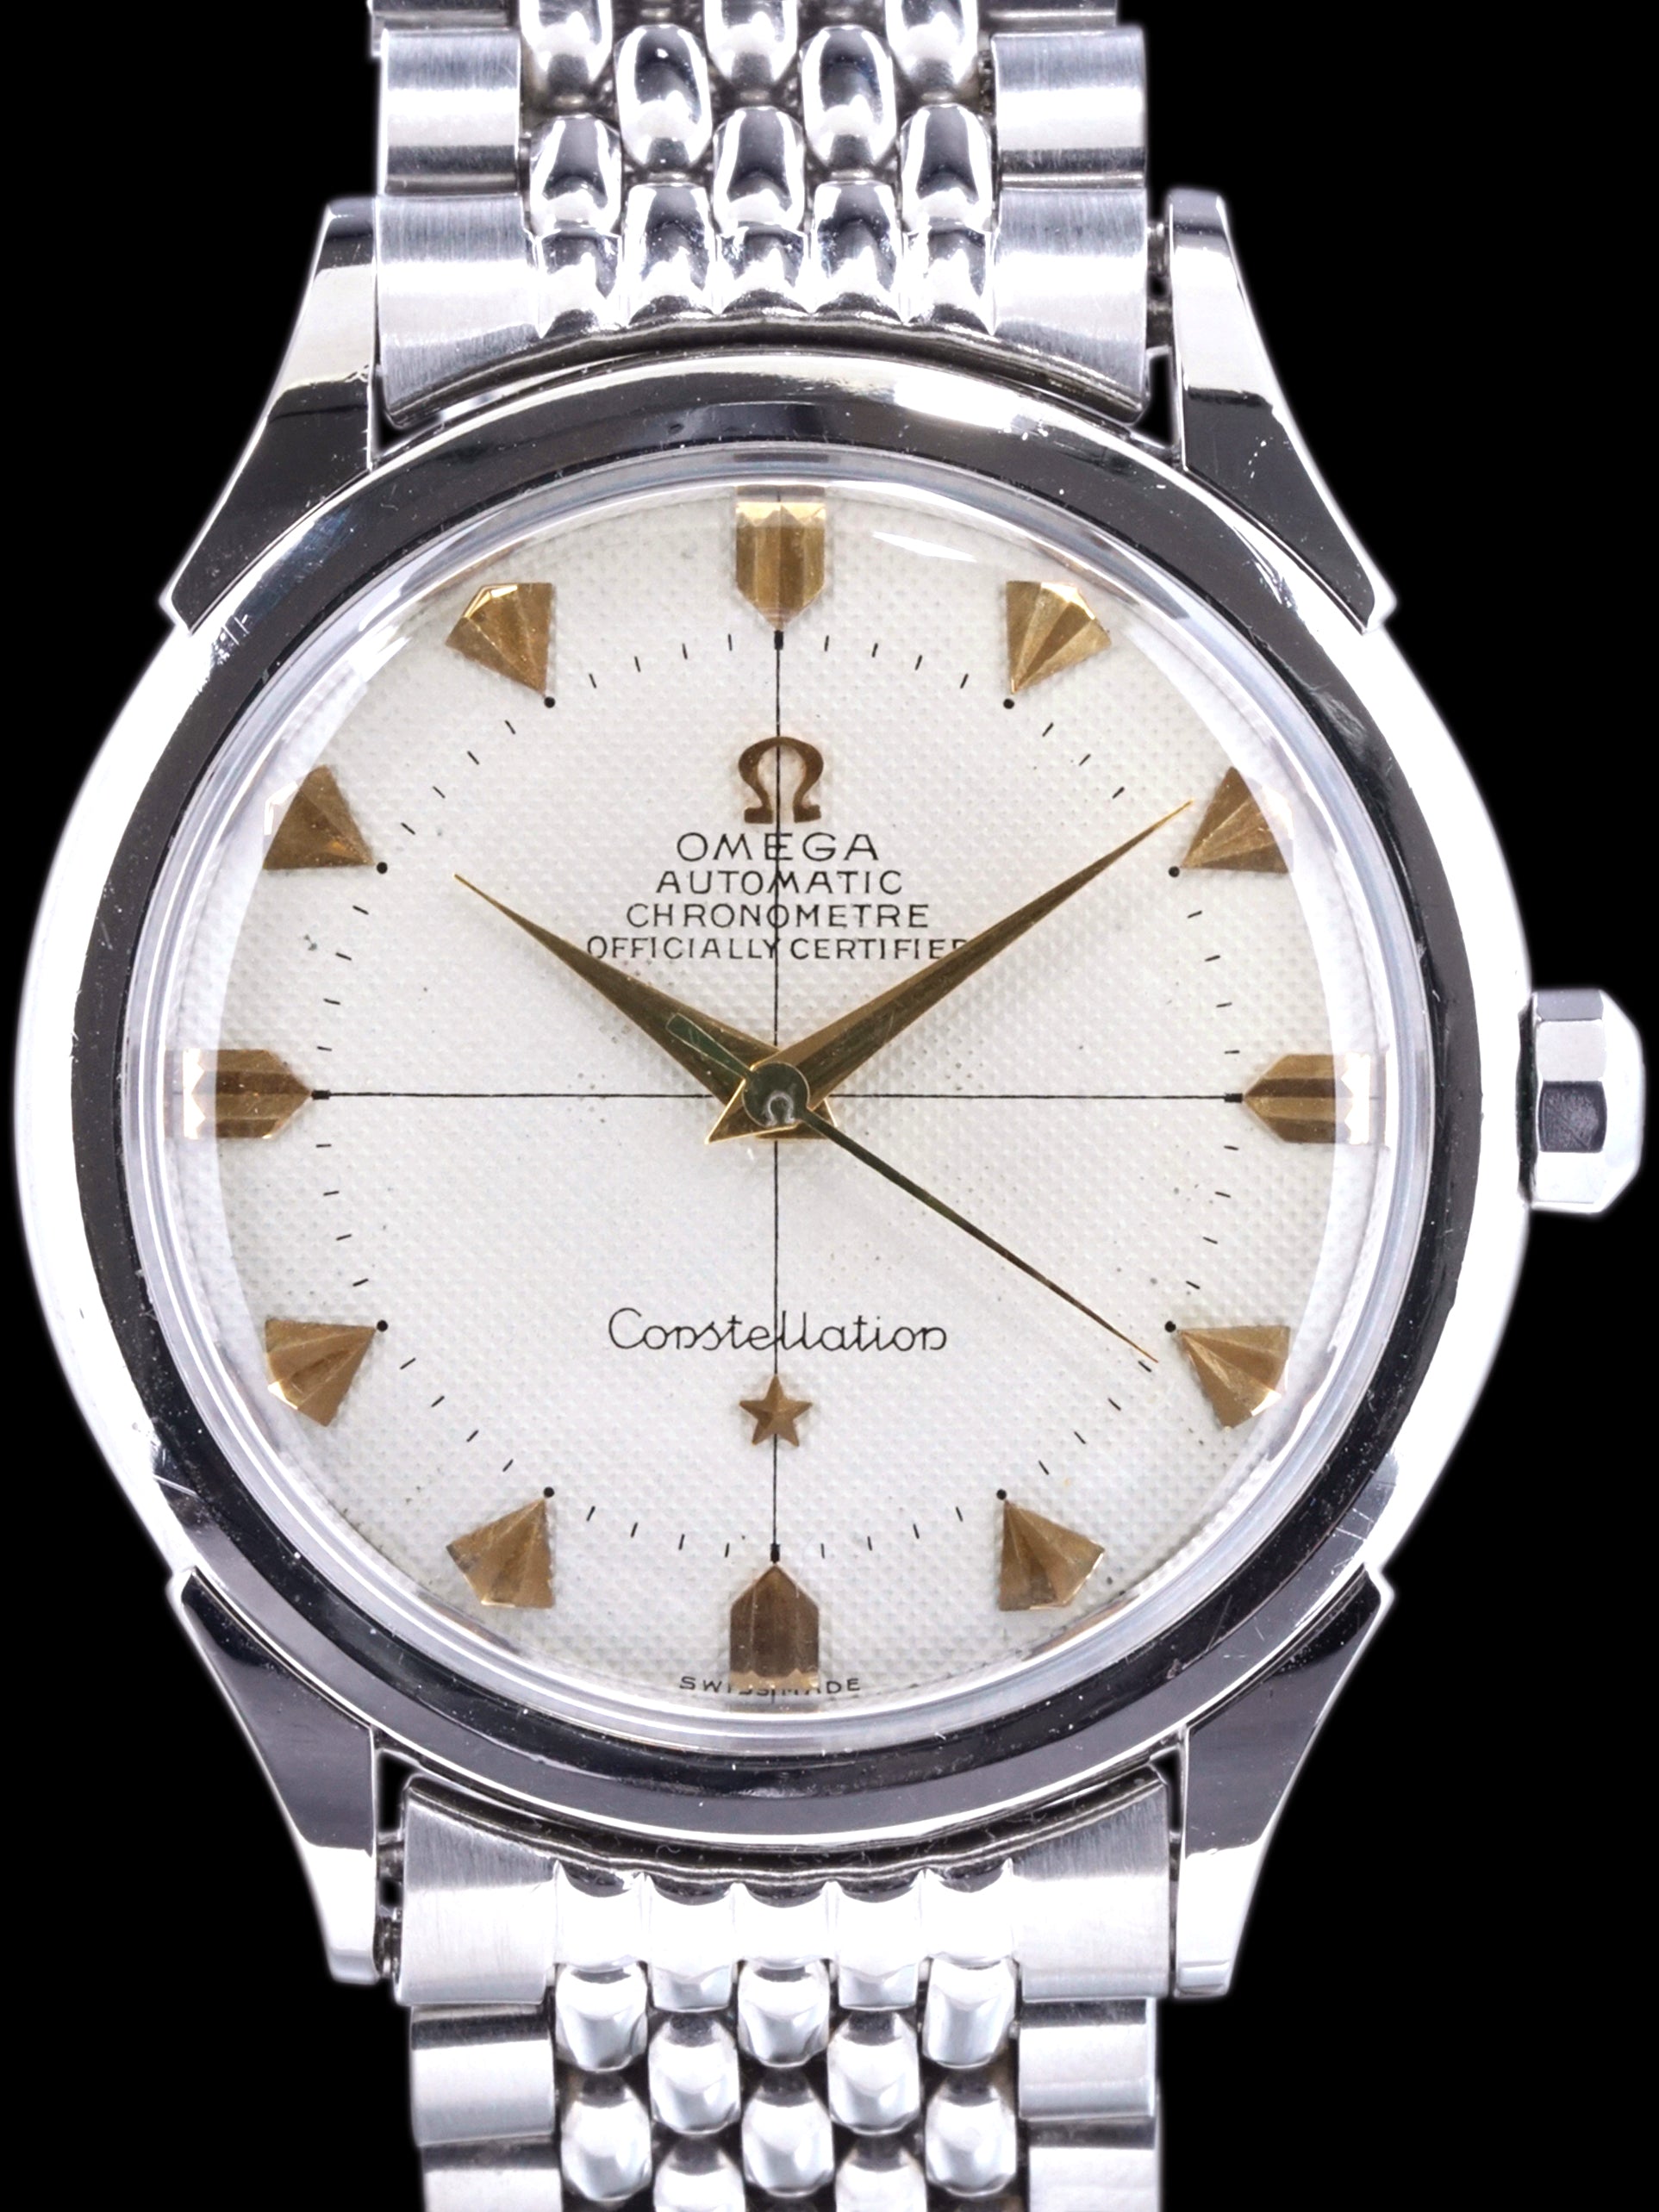 1952 Omega Constellation (Ref. 2652-1) "Honeycomb Dial"